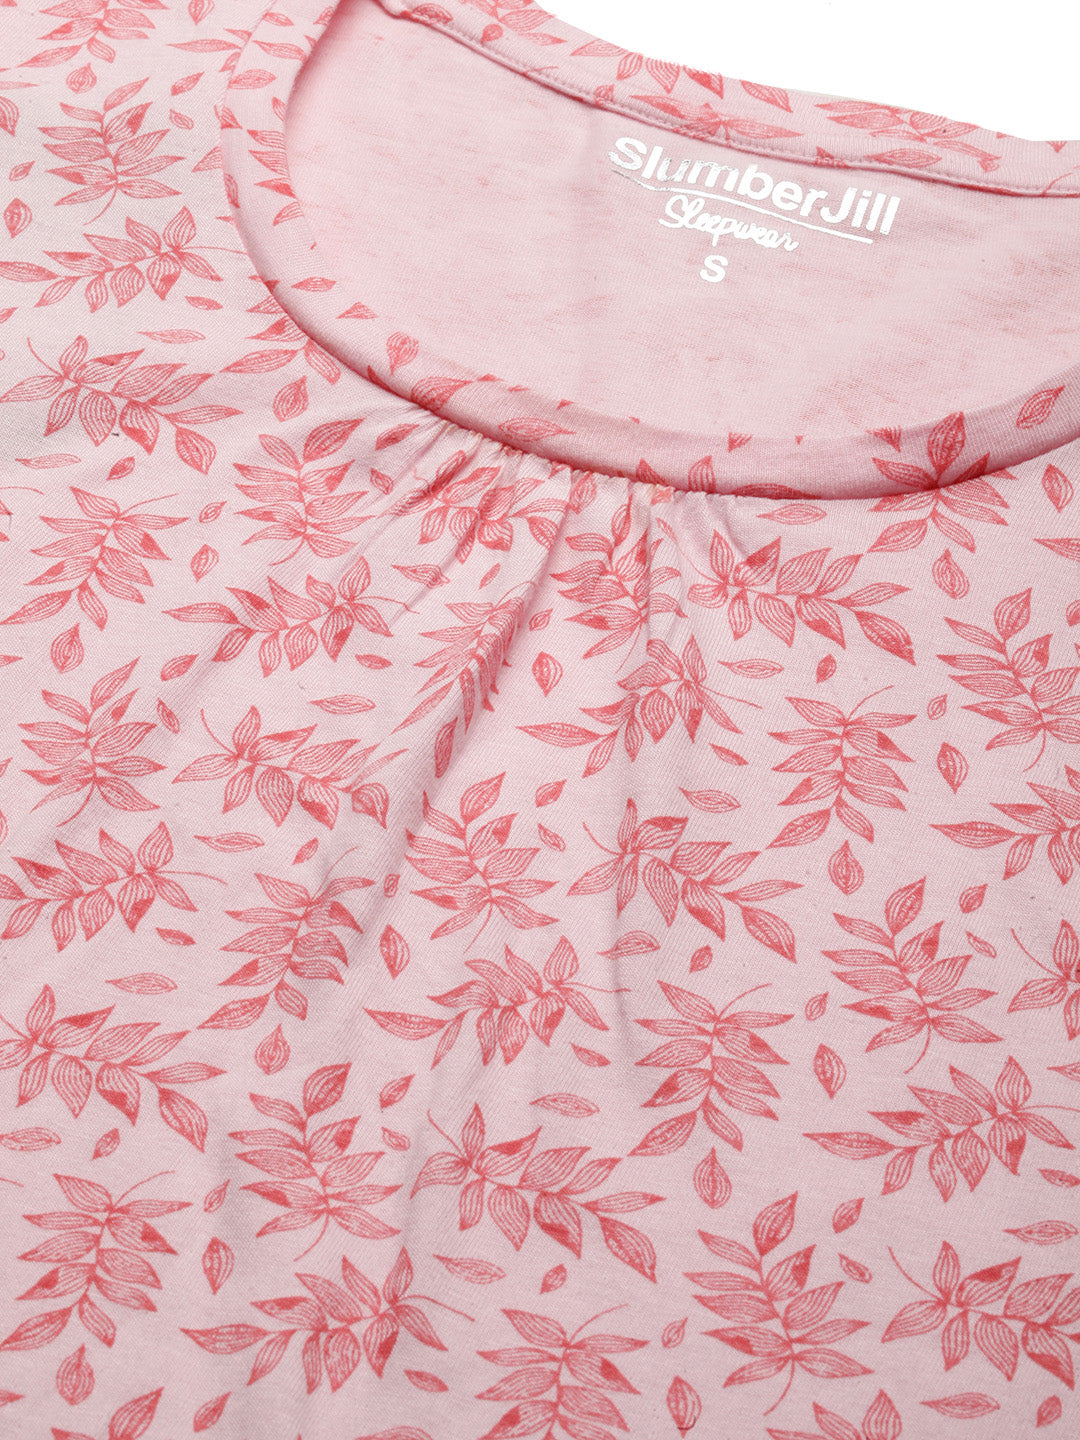 Tropical Leaf Printed Nightdress in Bride Pink - 100% Cotton